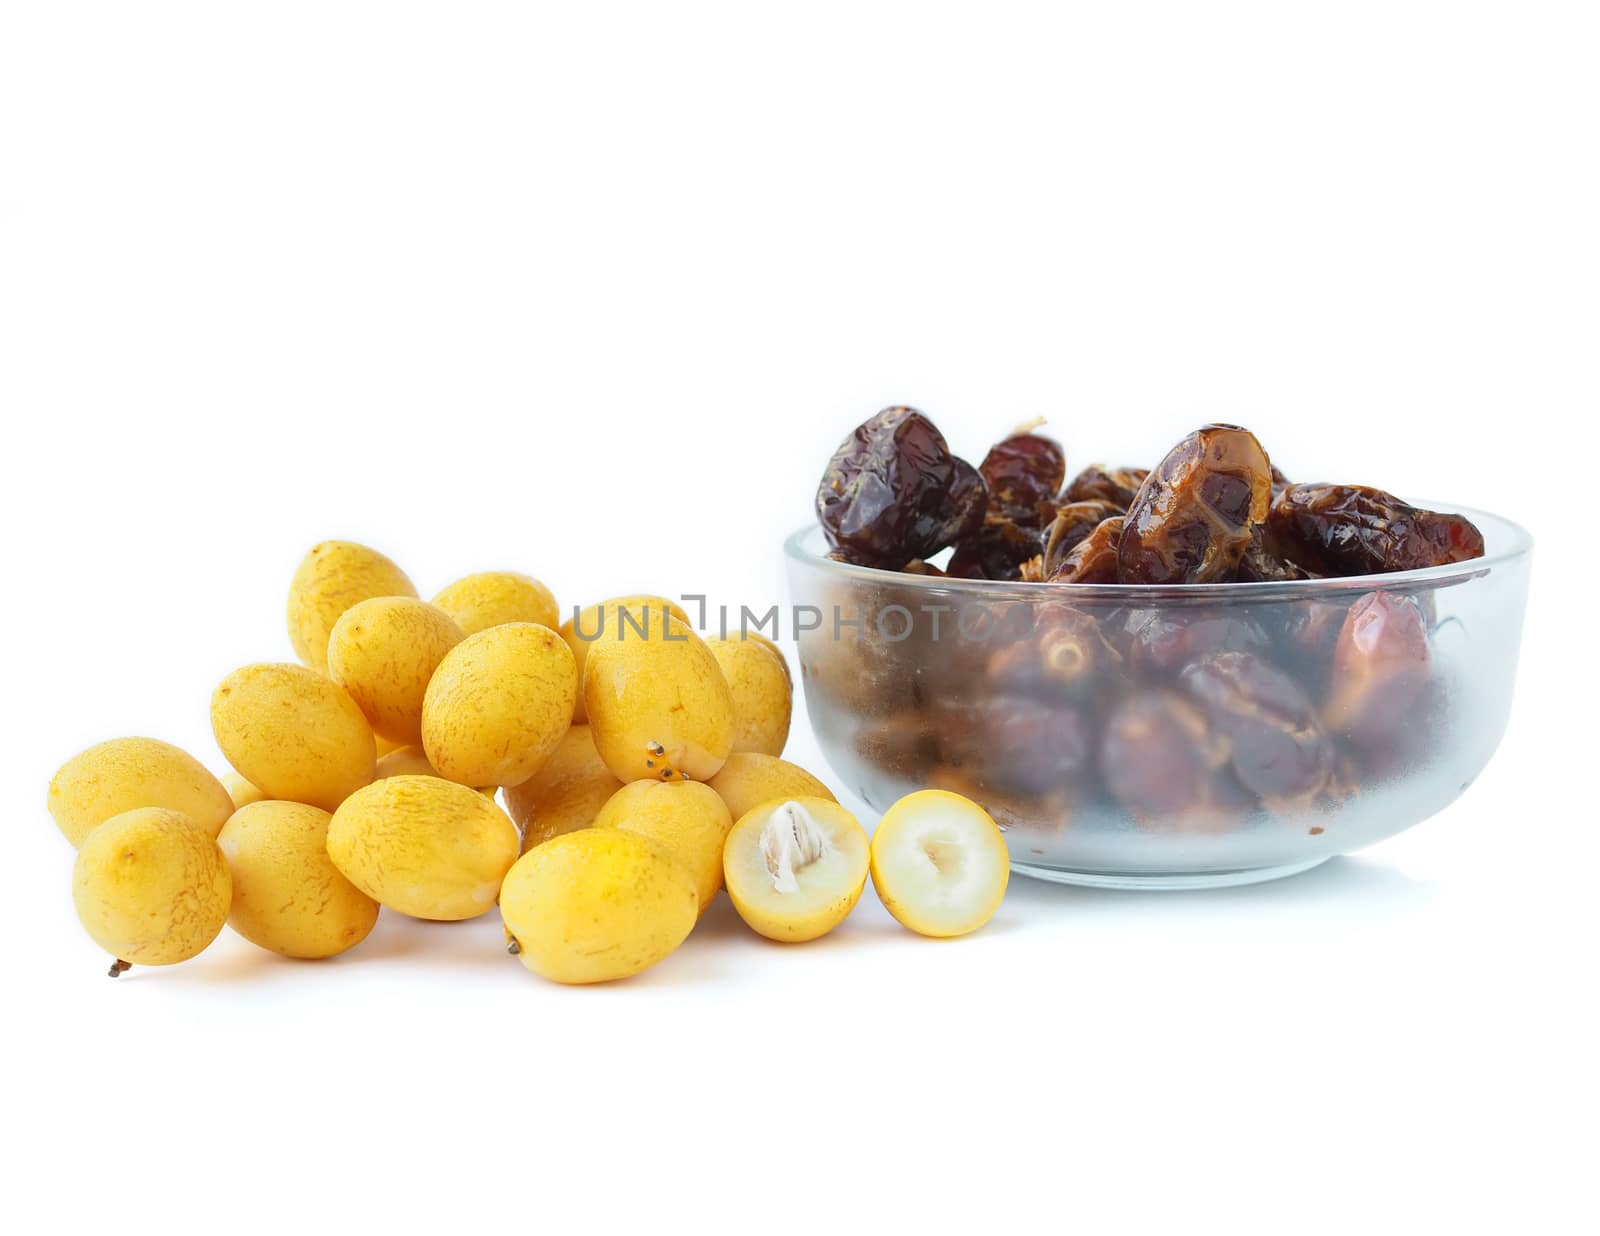 Close-up of fresh and dried date plam isolated on a white backgr by Unimages2527